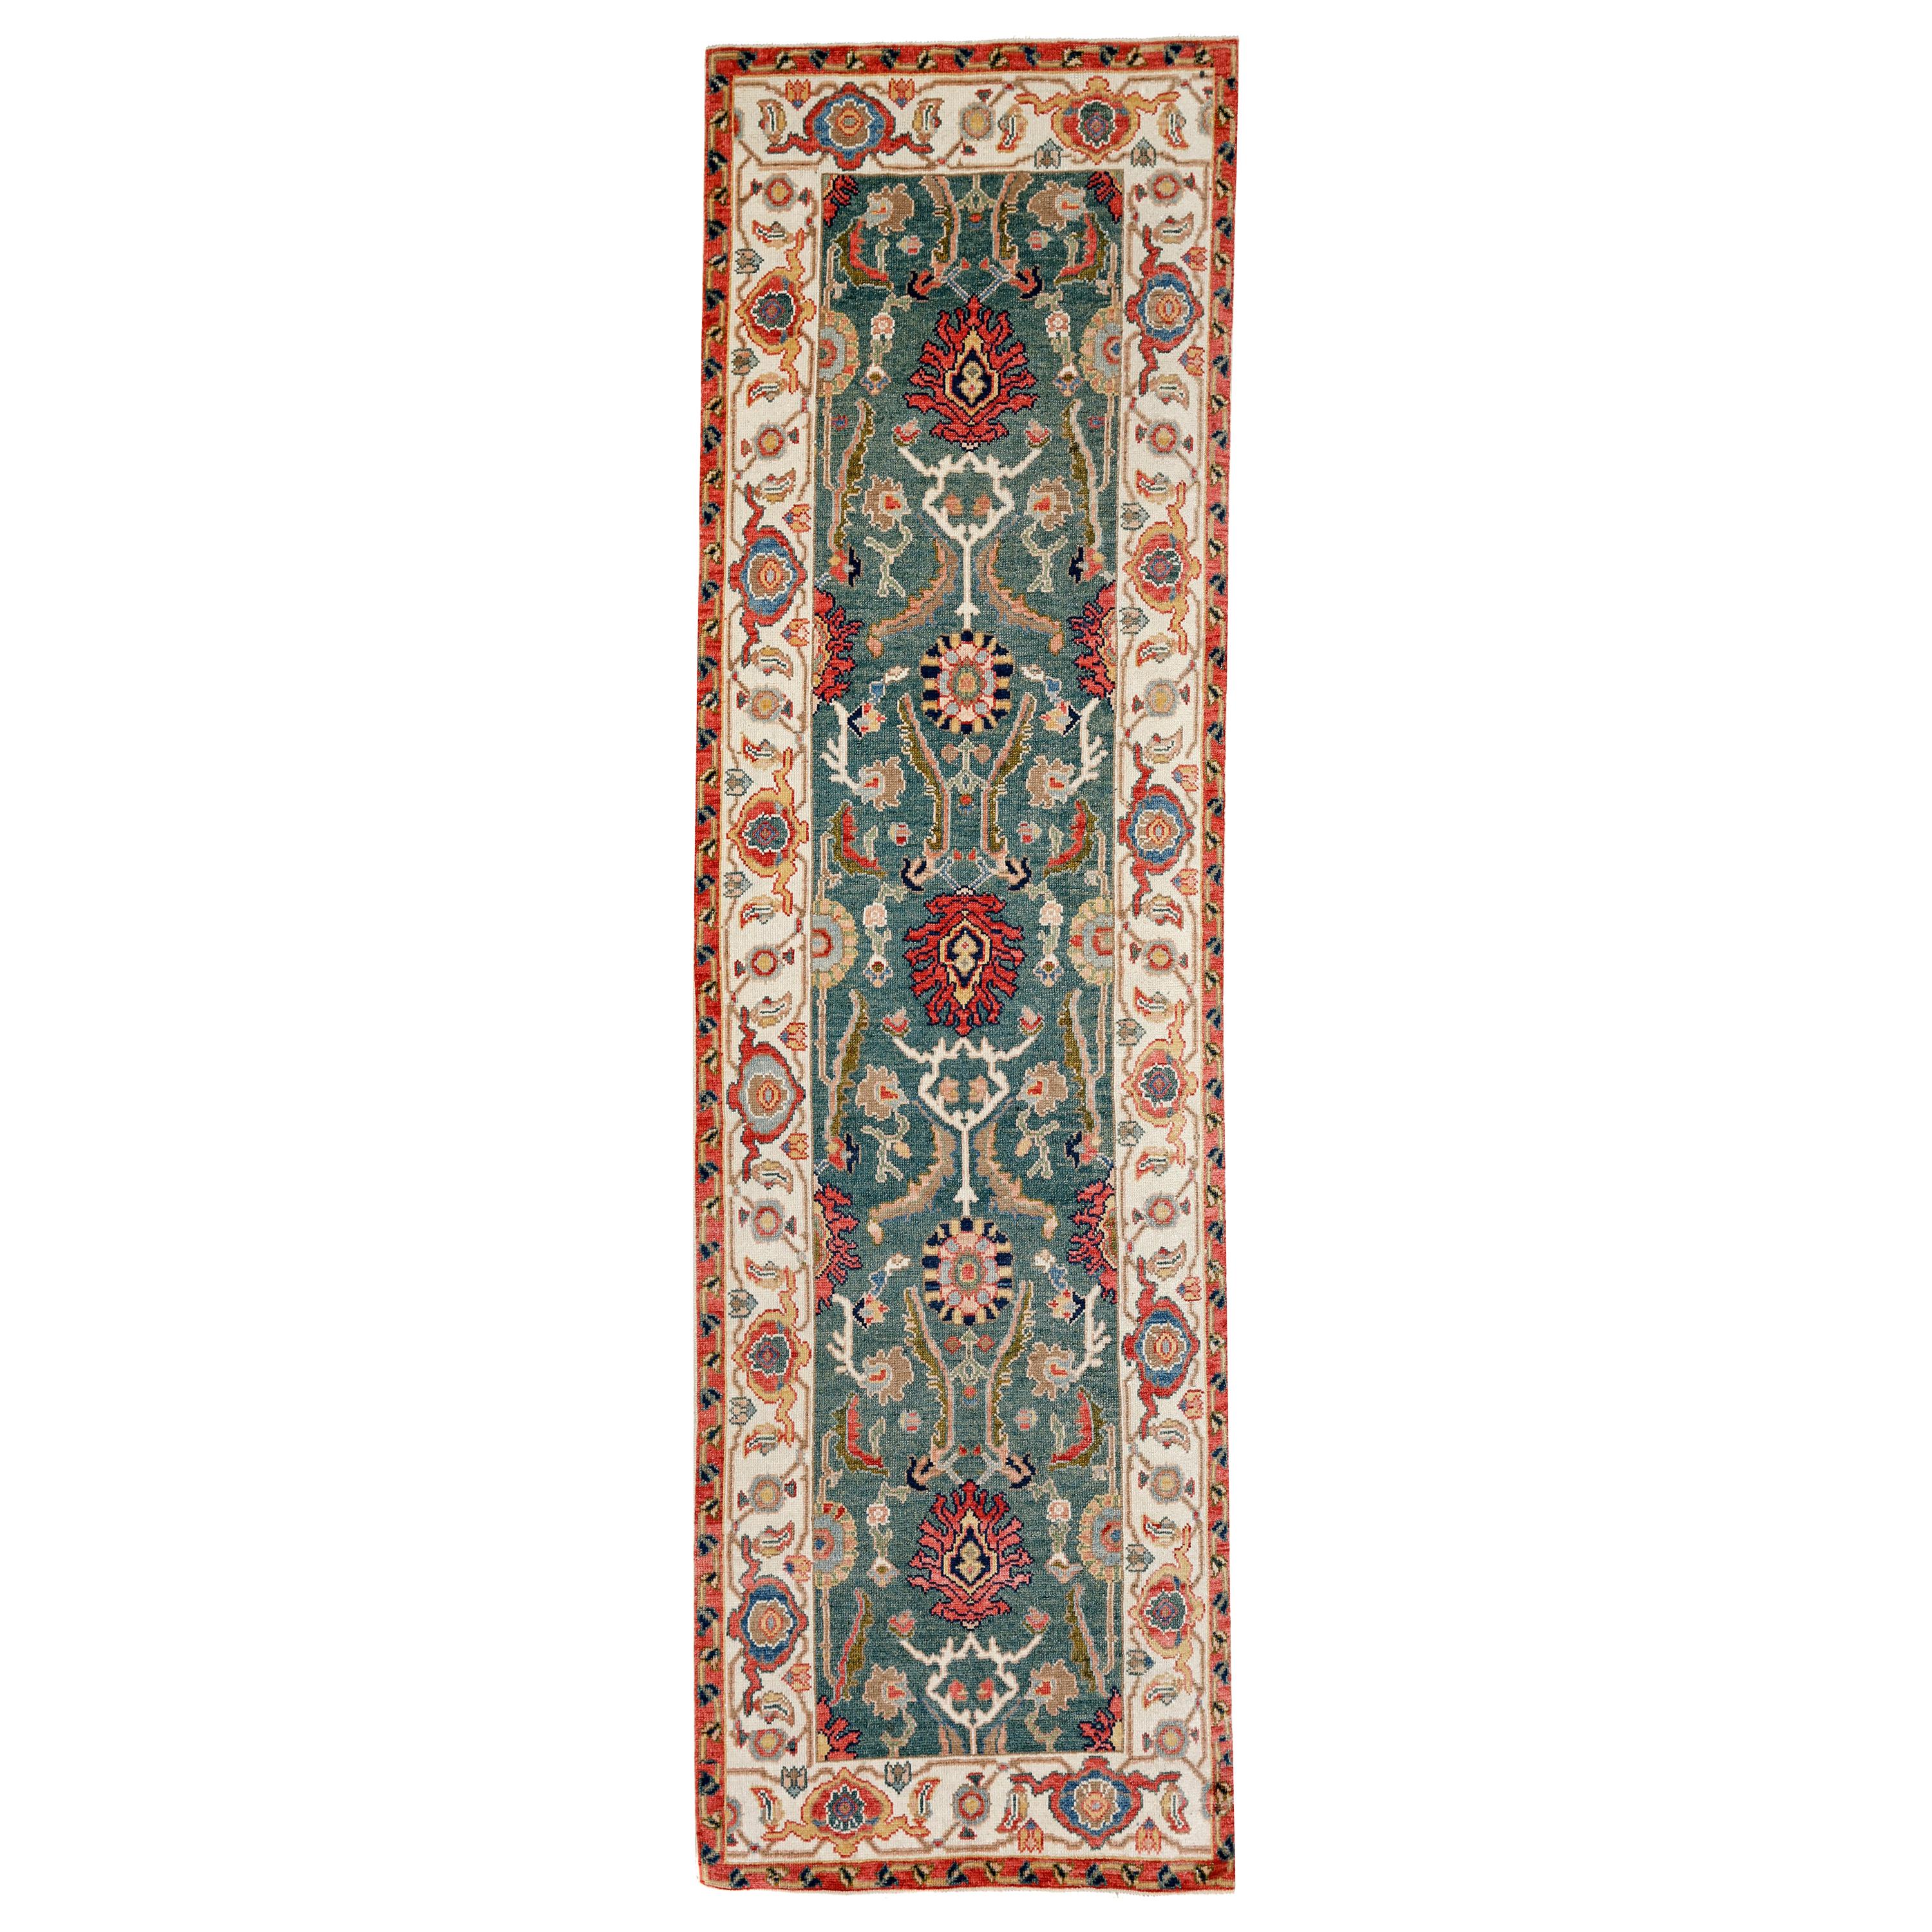 Green, Gold and Red Contemporary Handmade Wool Turkish Oushak Runner